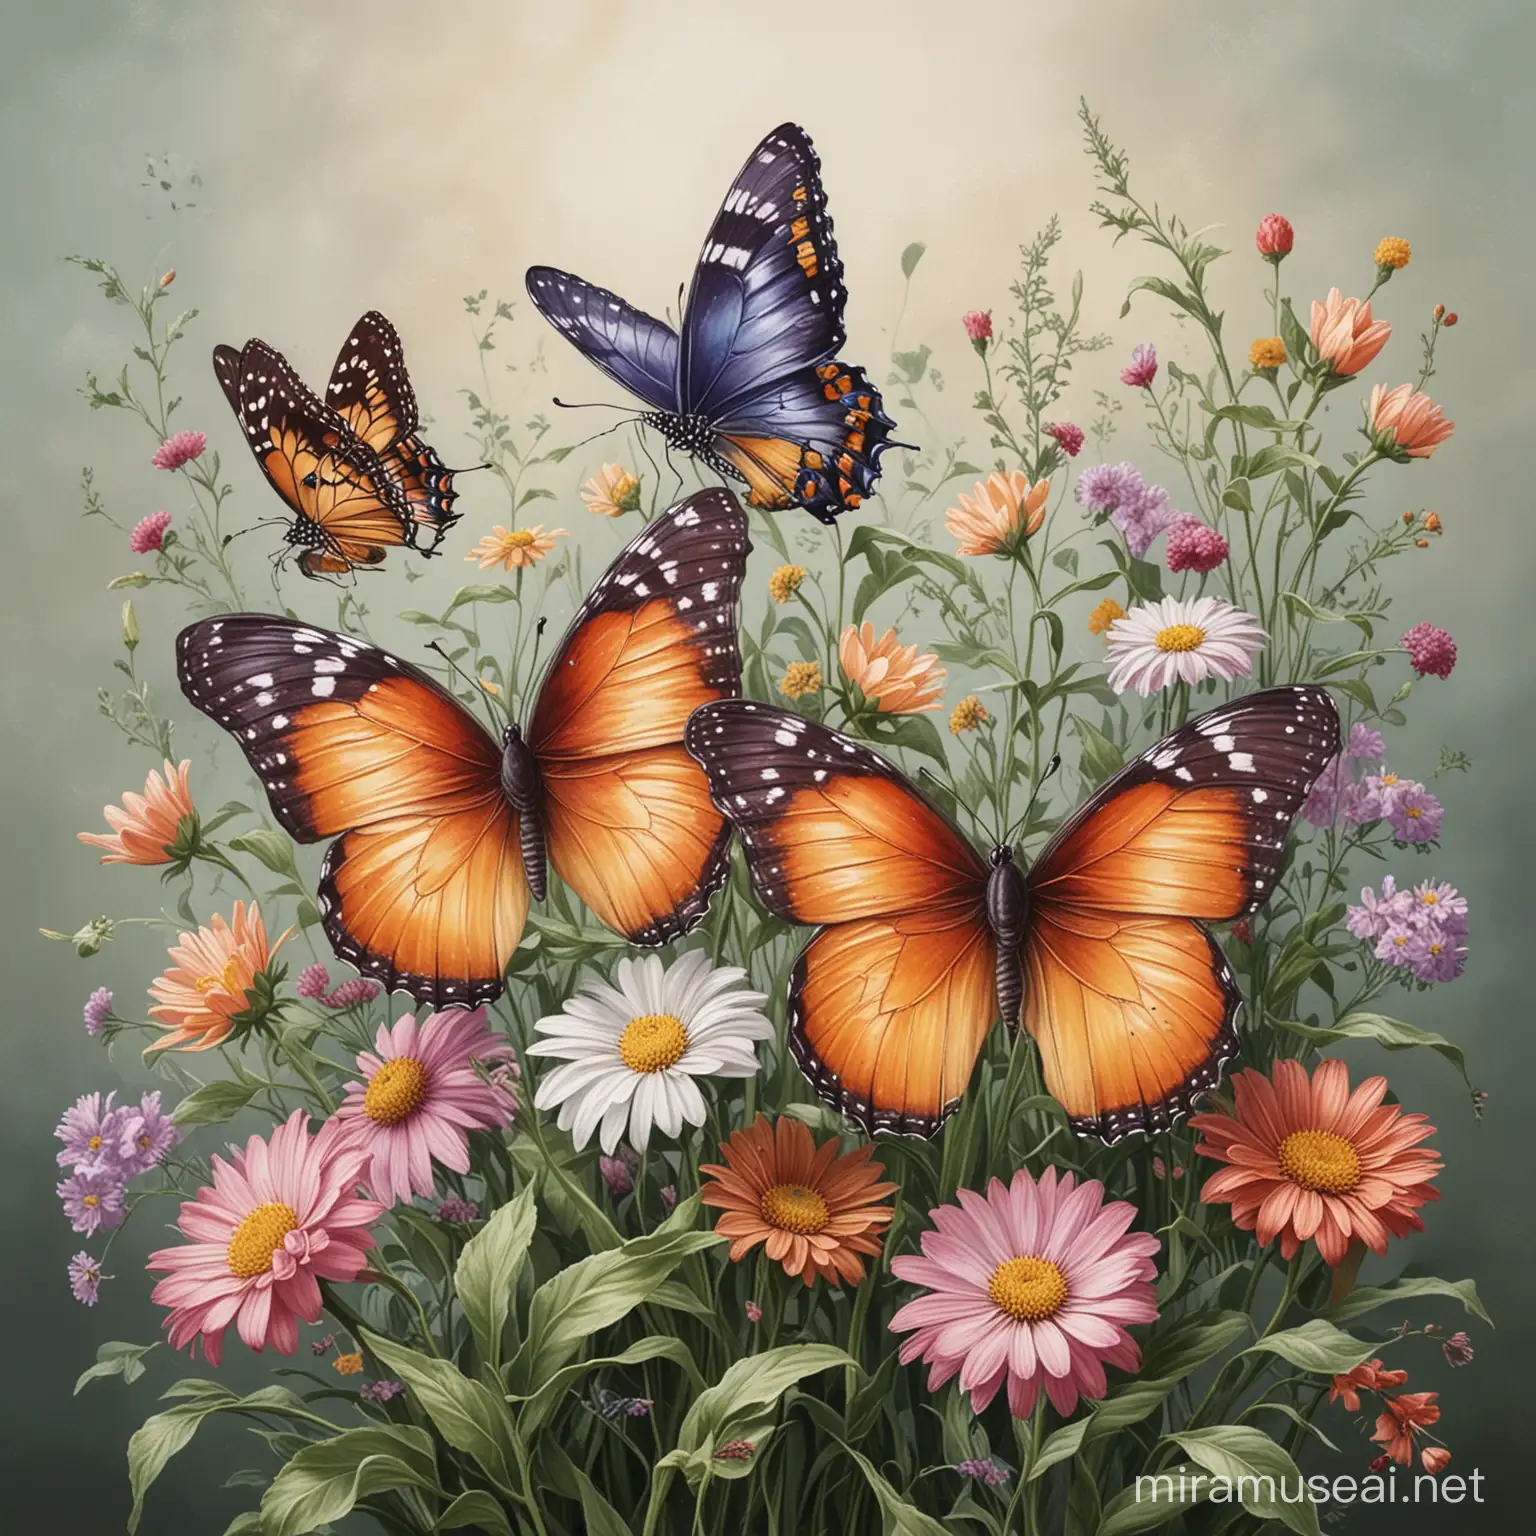 flowers with 2 butterflies
